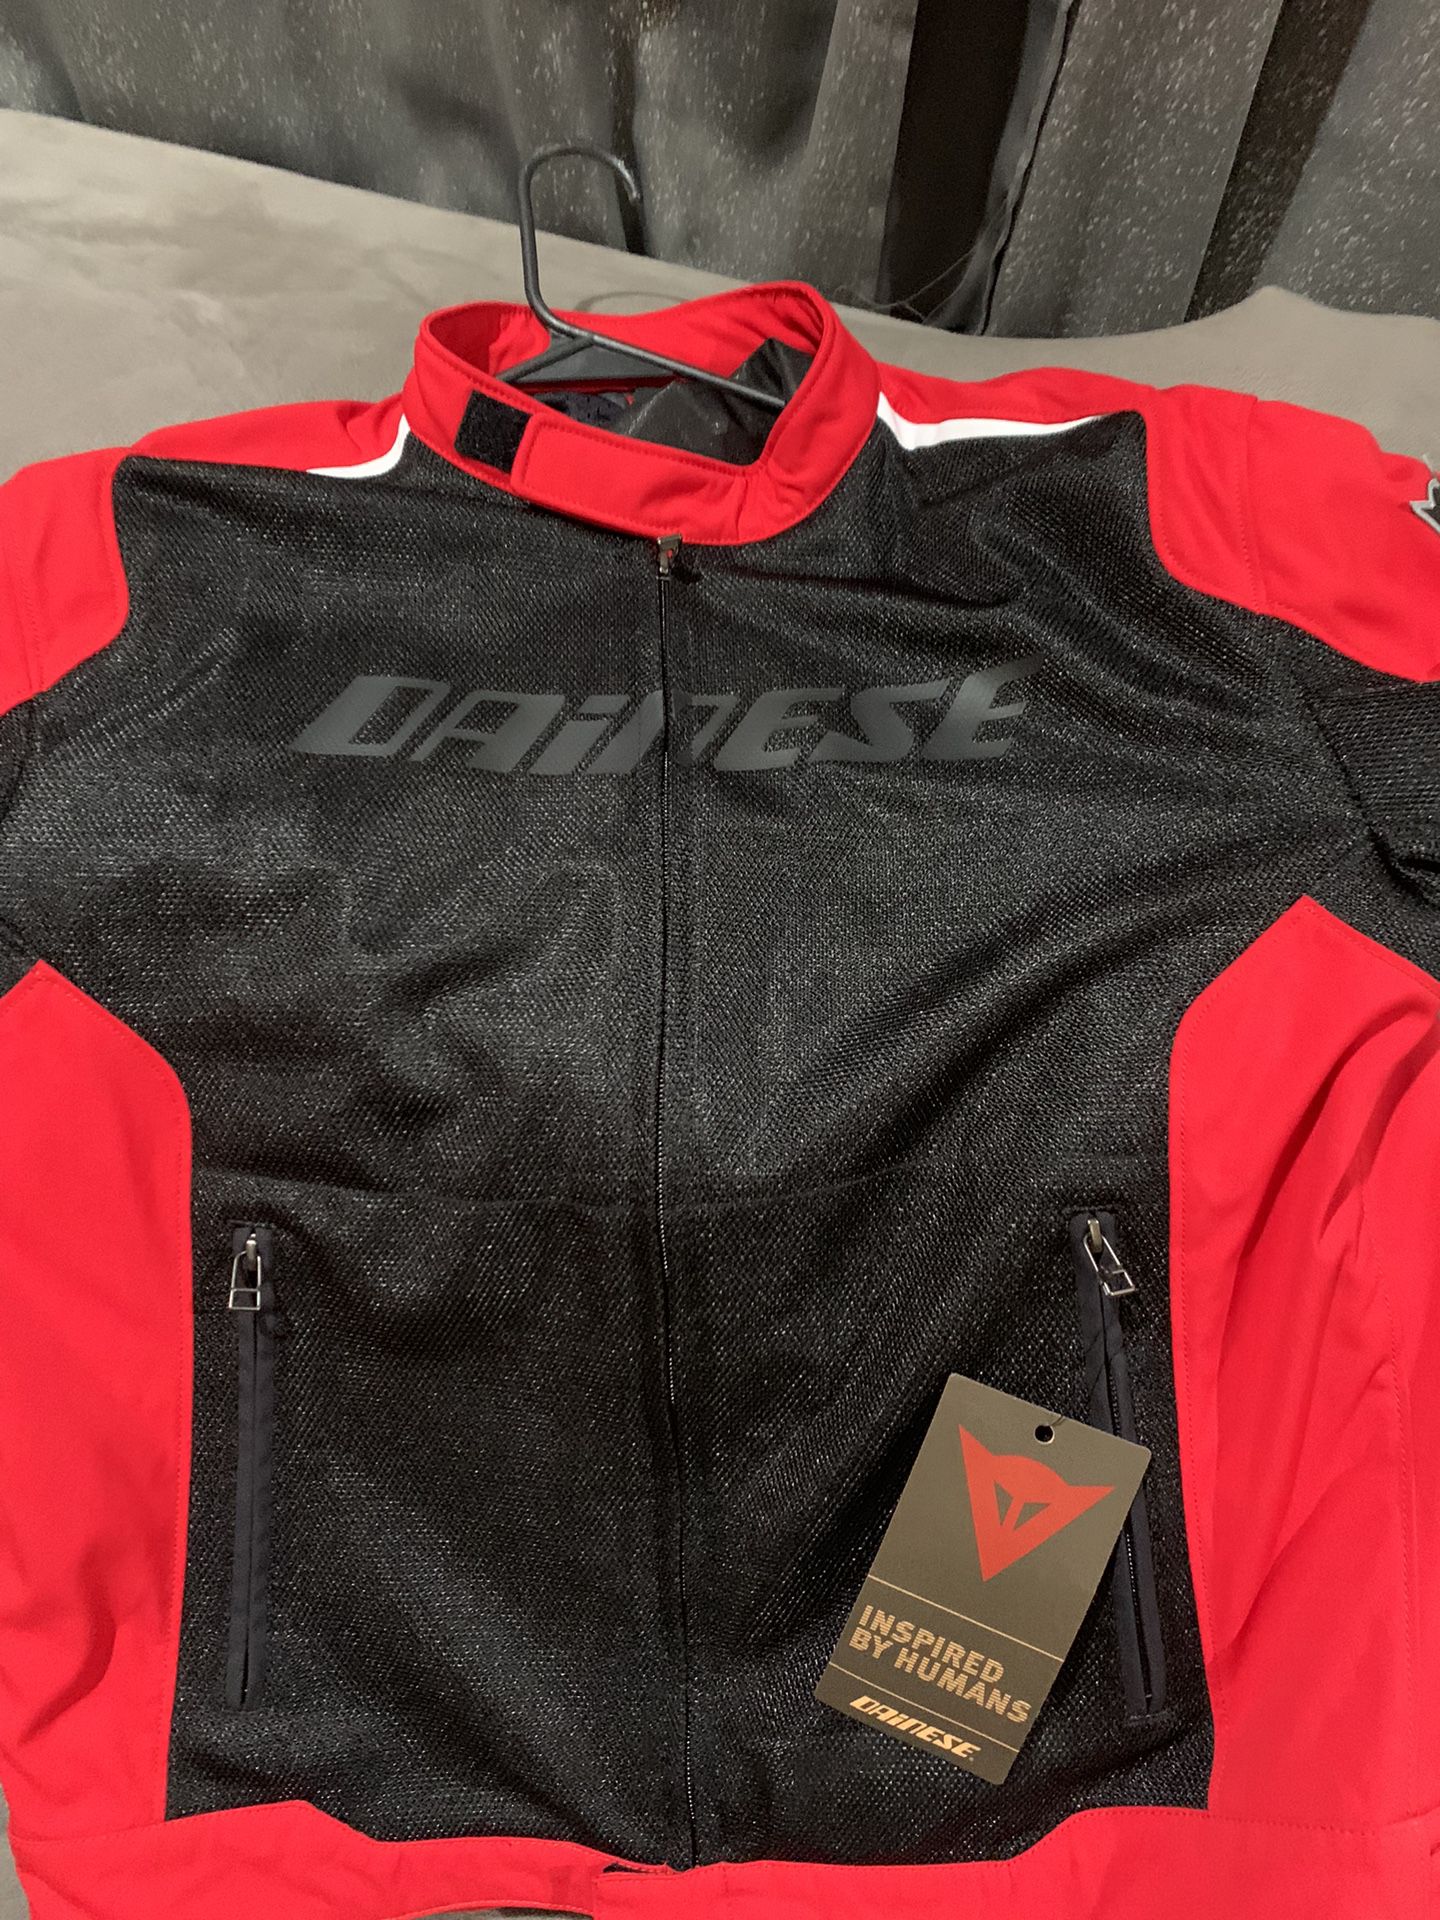 Dainese Hydra Flux Air D-Dry Jacket Size 54 NEW WITH TAGS for